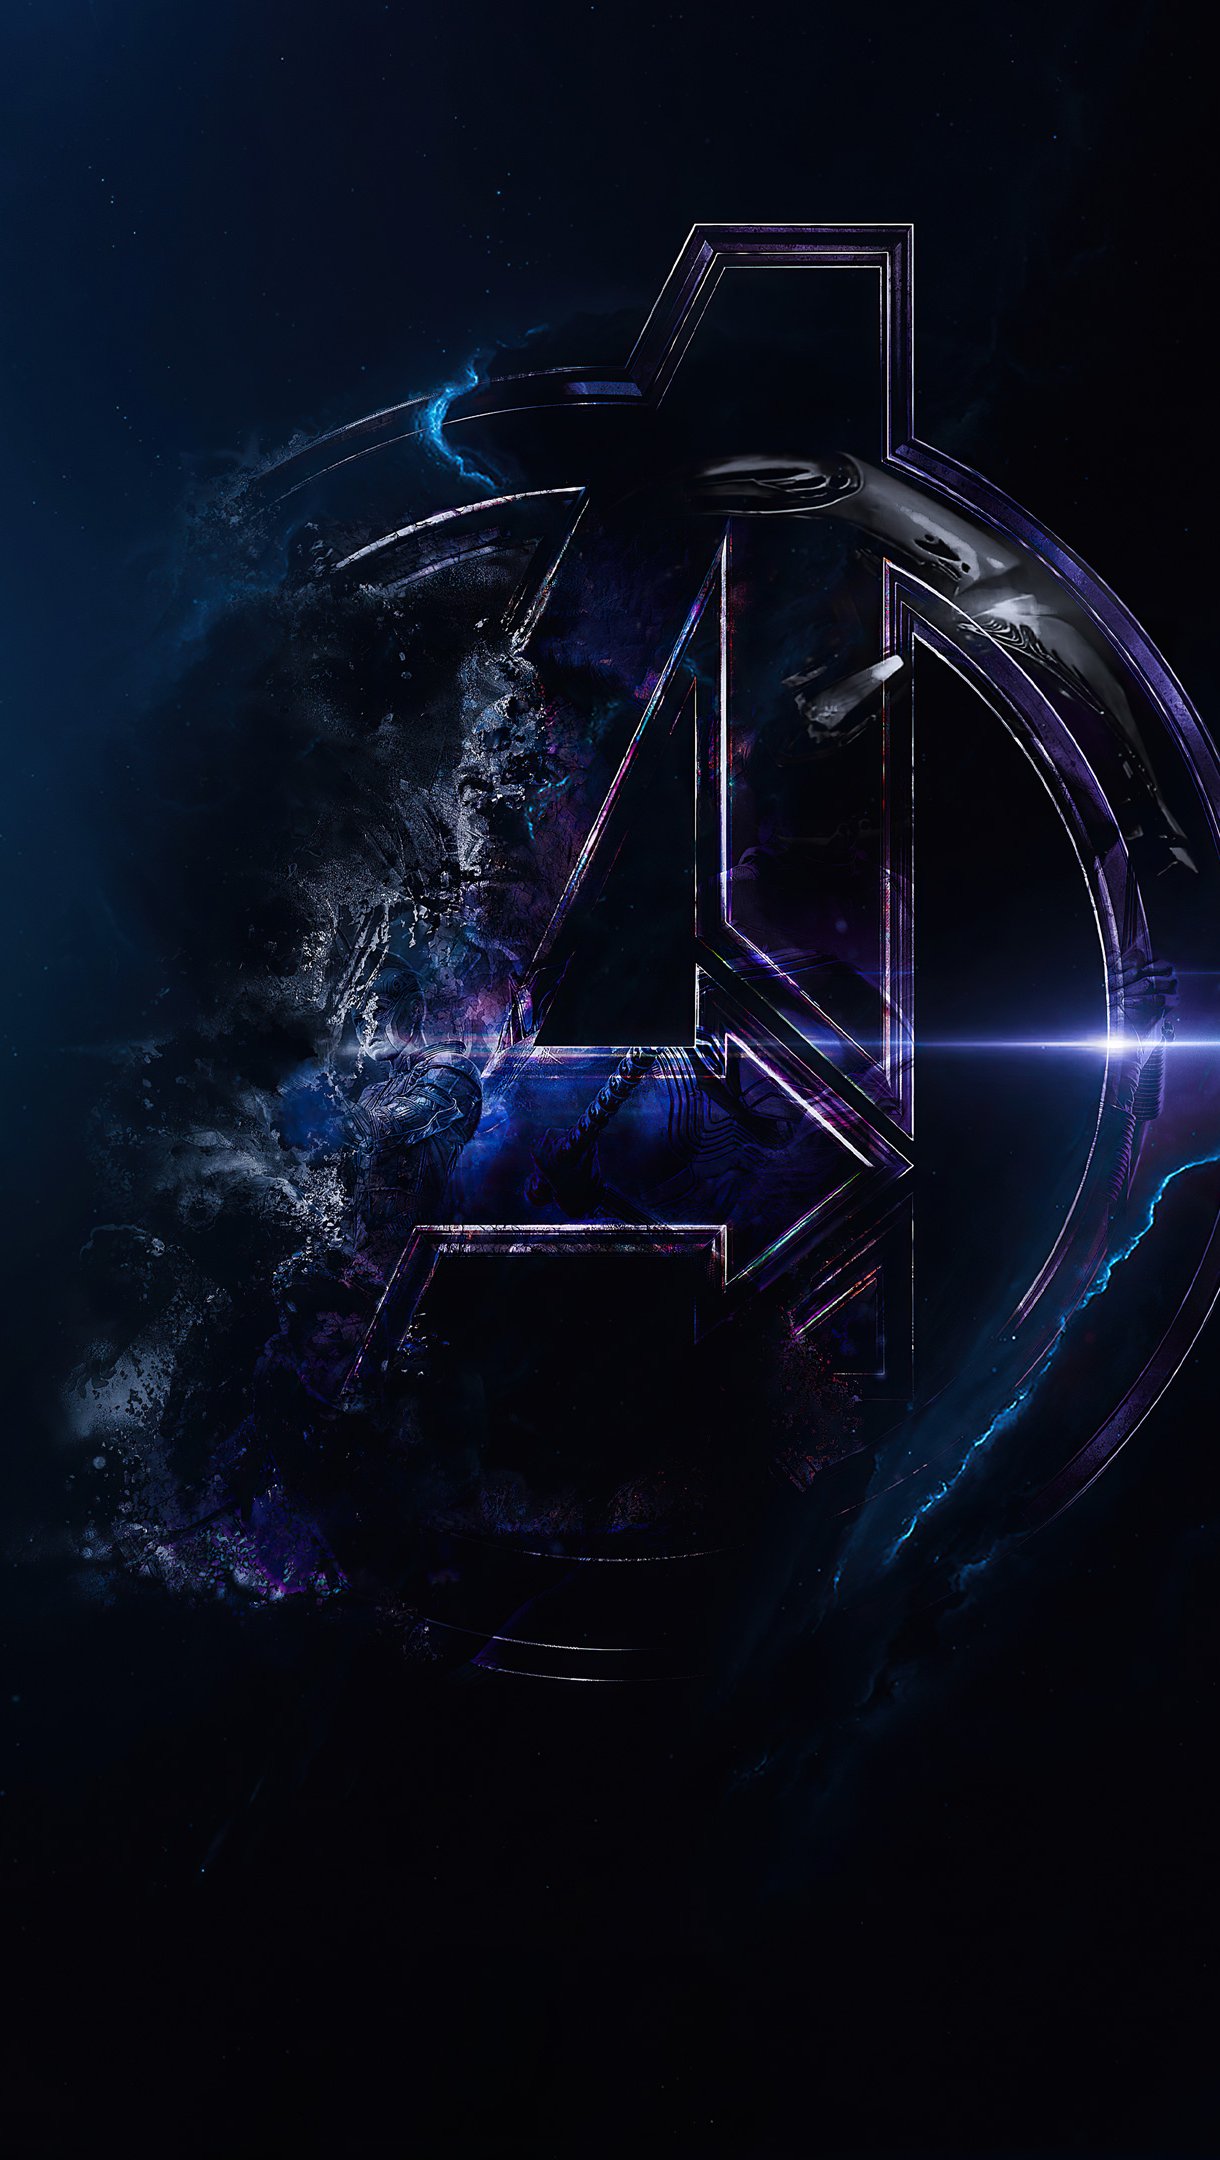 Free The Avengers BEST Wallpapers APK Download For Android | GetJar